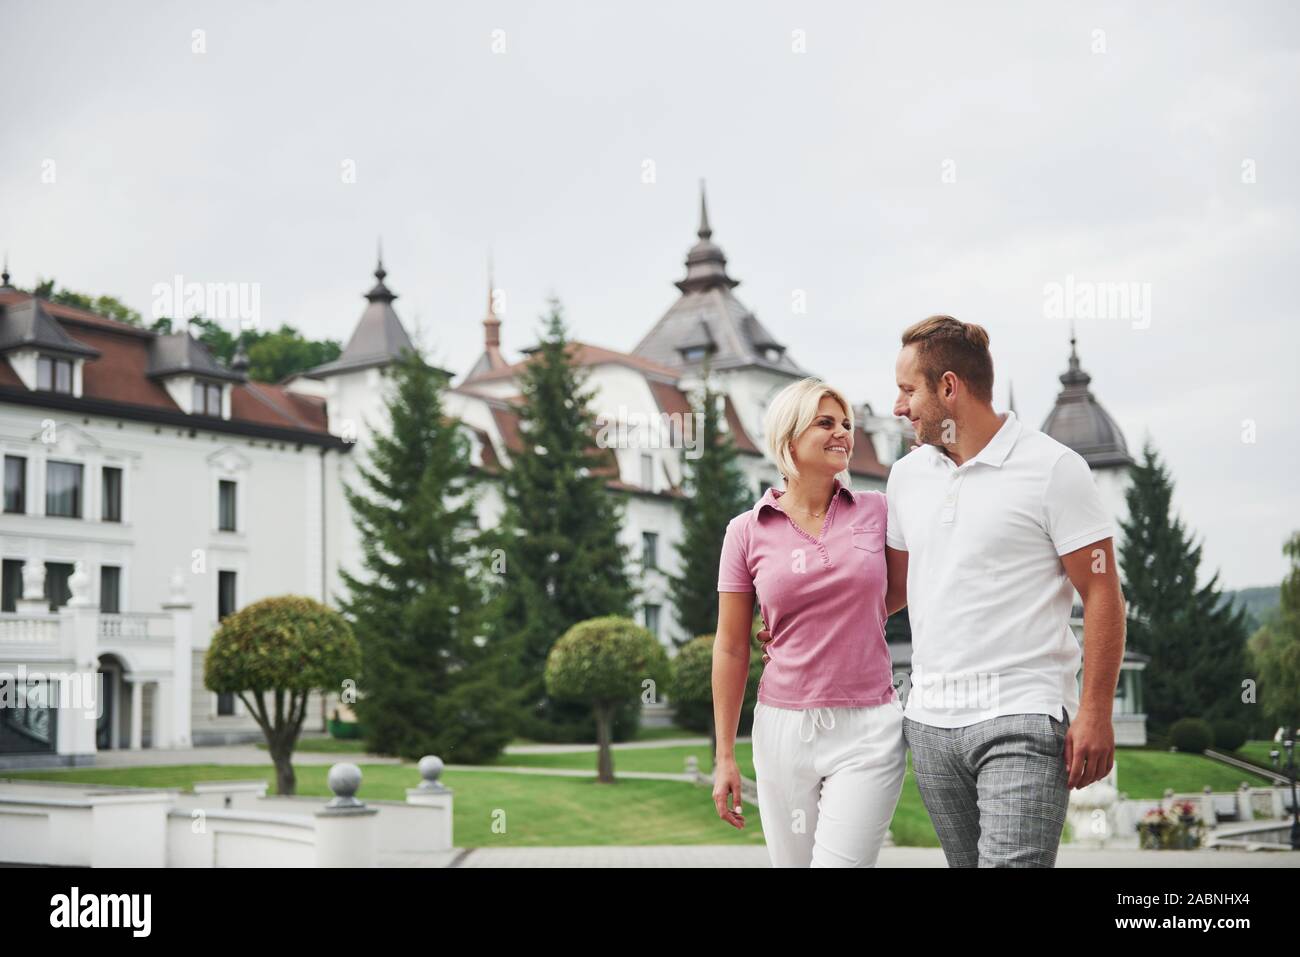 A handsome couple, man and a woman walking together holding hands. The concept of middle-aged relationships Stock Photo